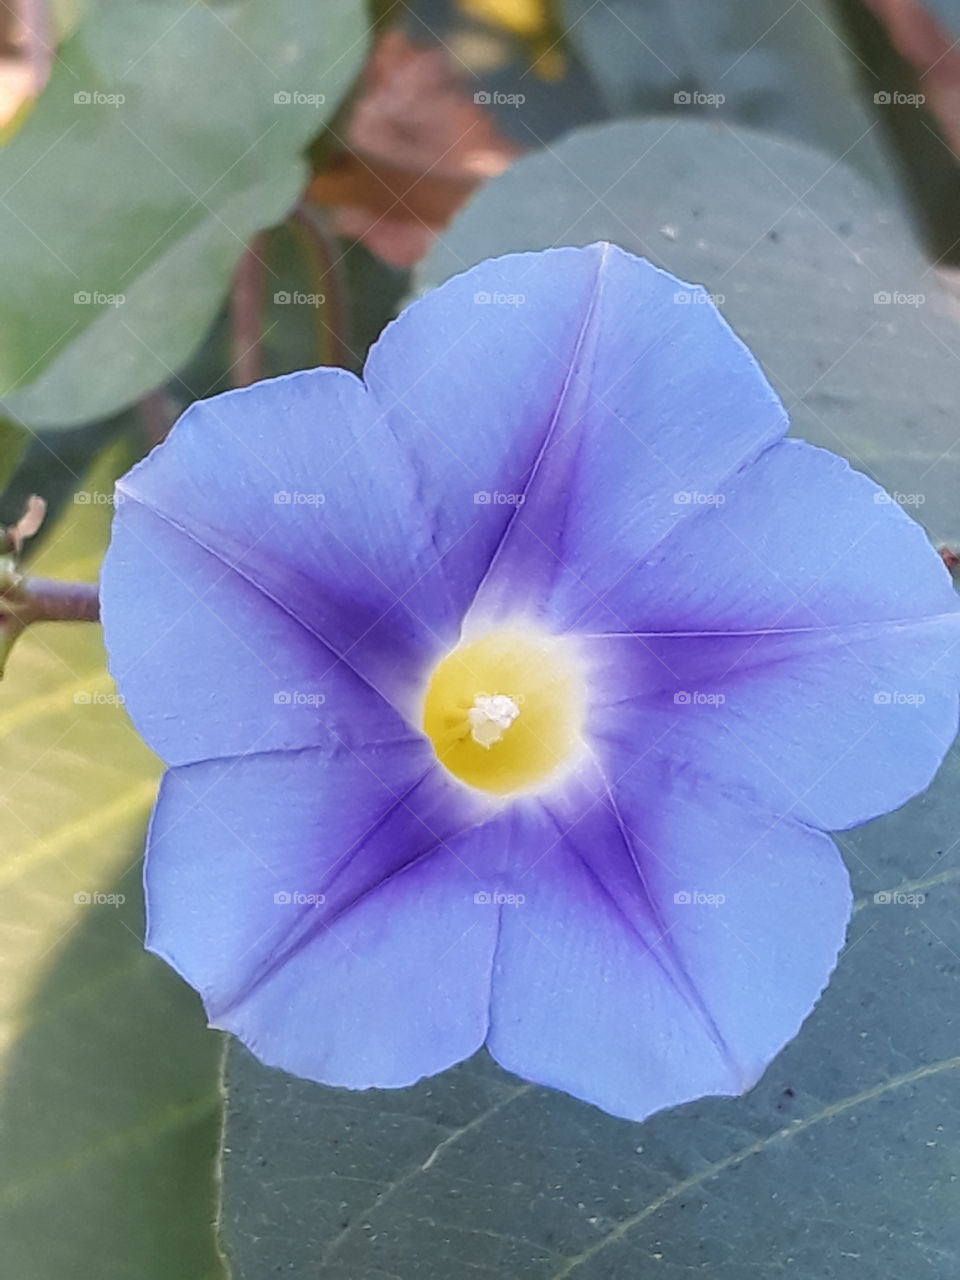 Elevated view of purple flower